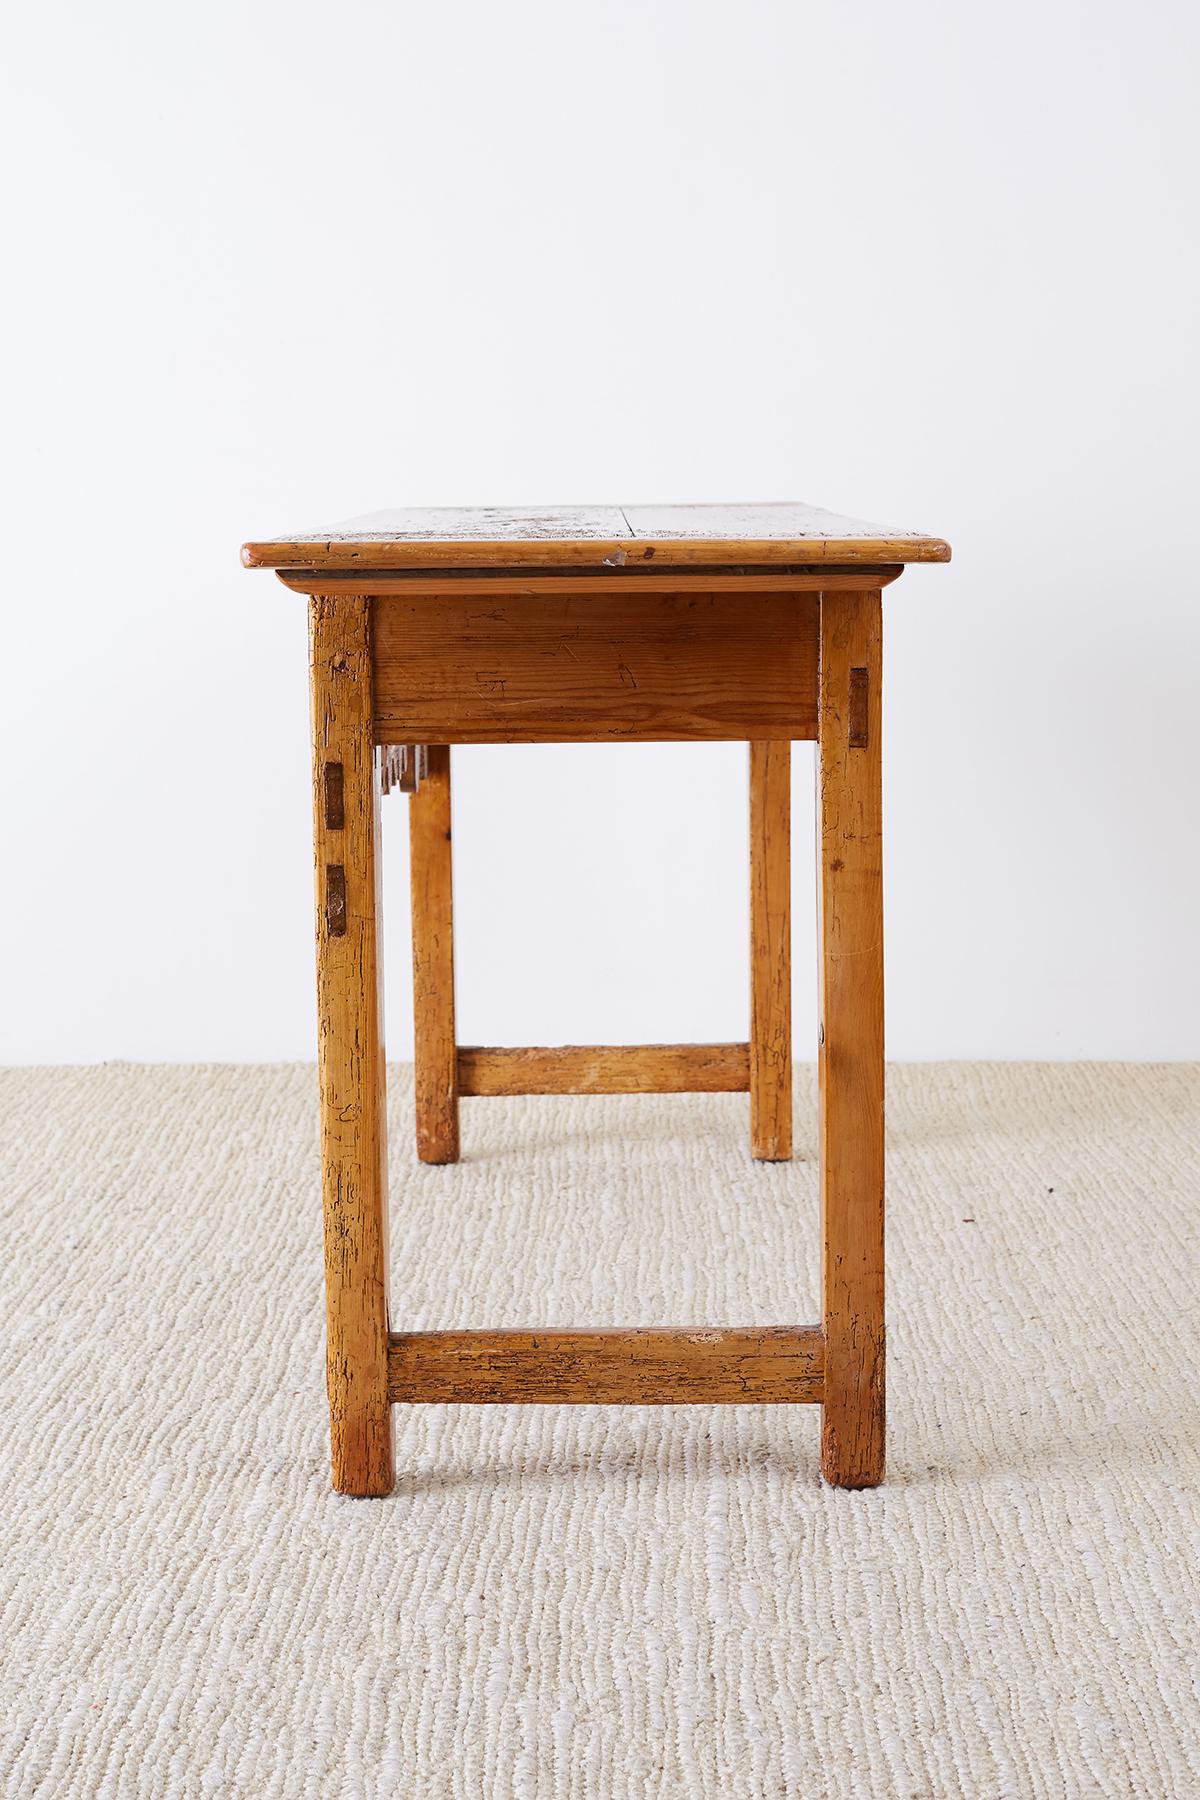 18th Century Rustic Pine Farmhouse Table or Console 8